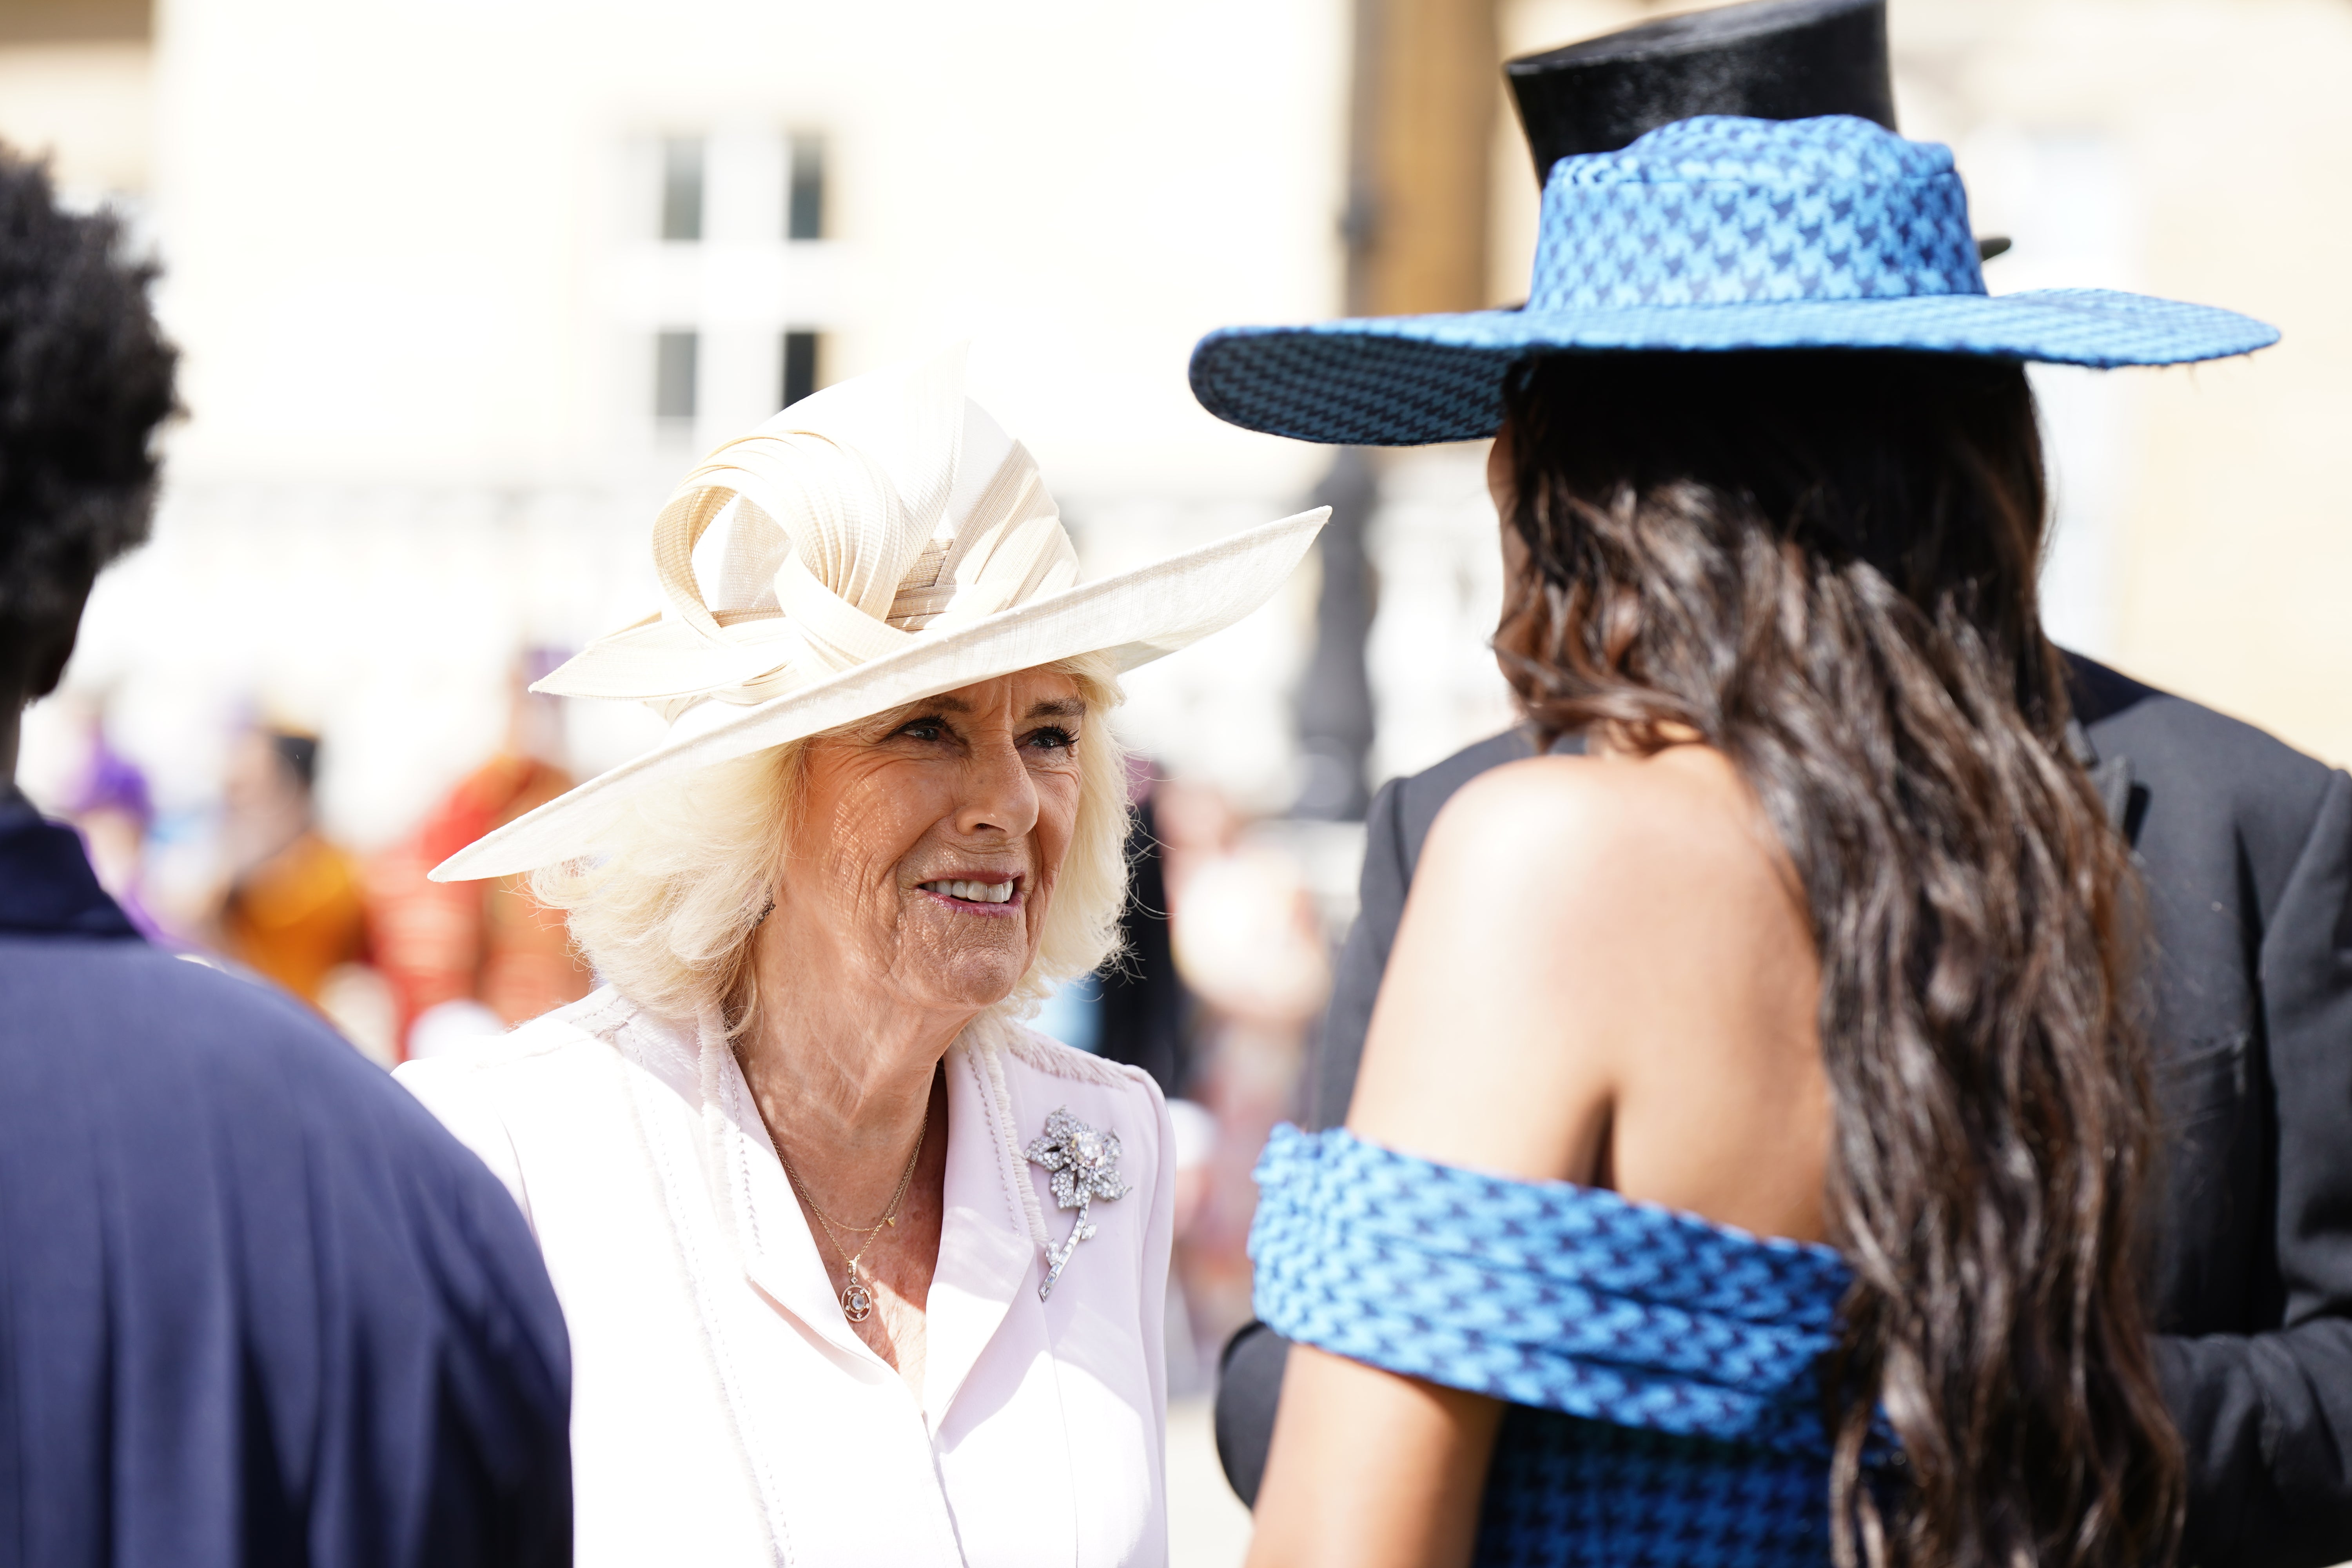 ‘You alright? Nice to meet you’ Jama said while greeting Queen Camilla